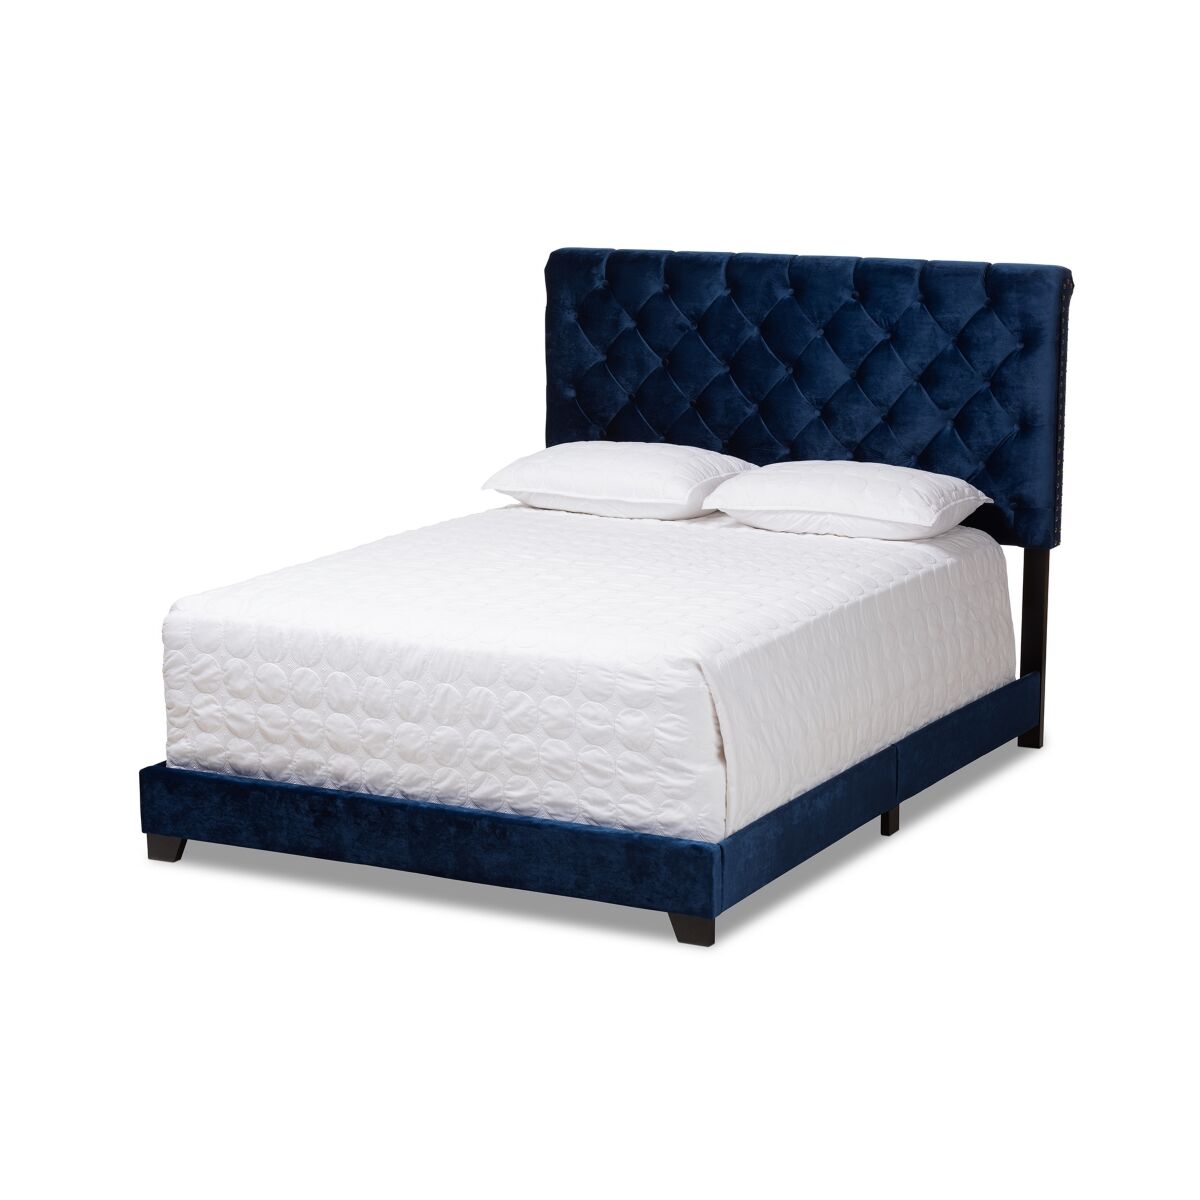 Furniture Candace Queen Bed - Navy